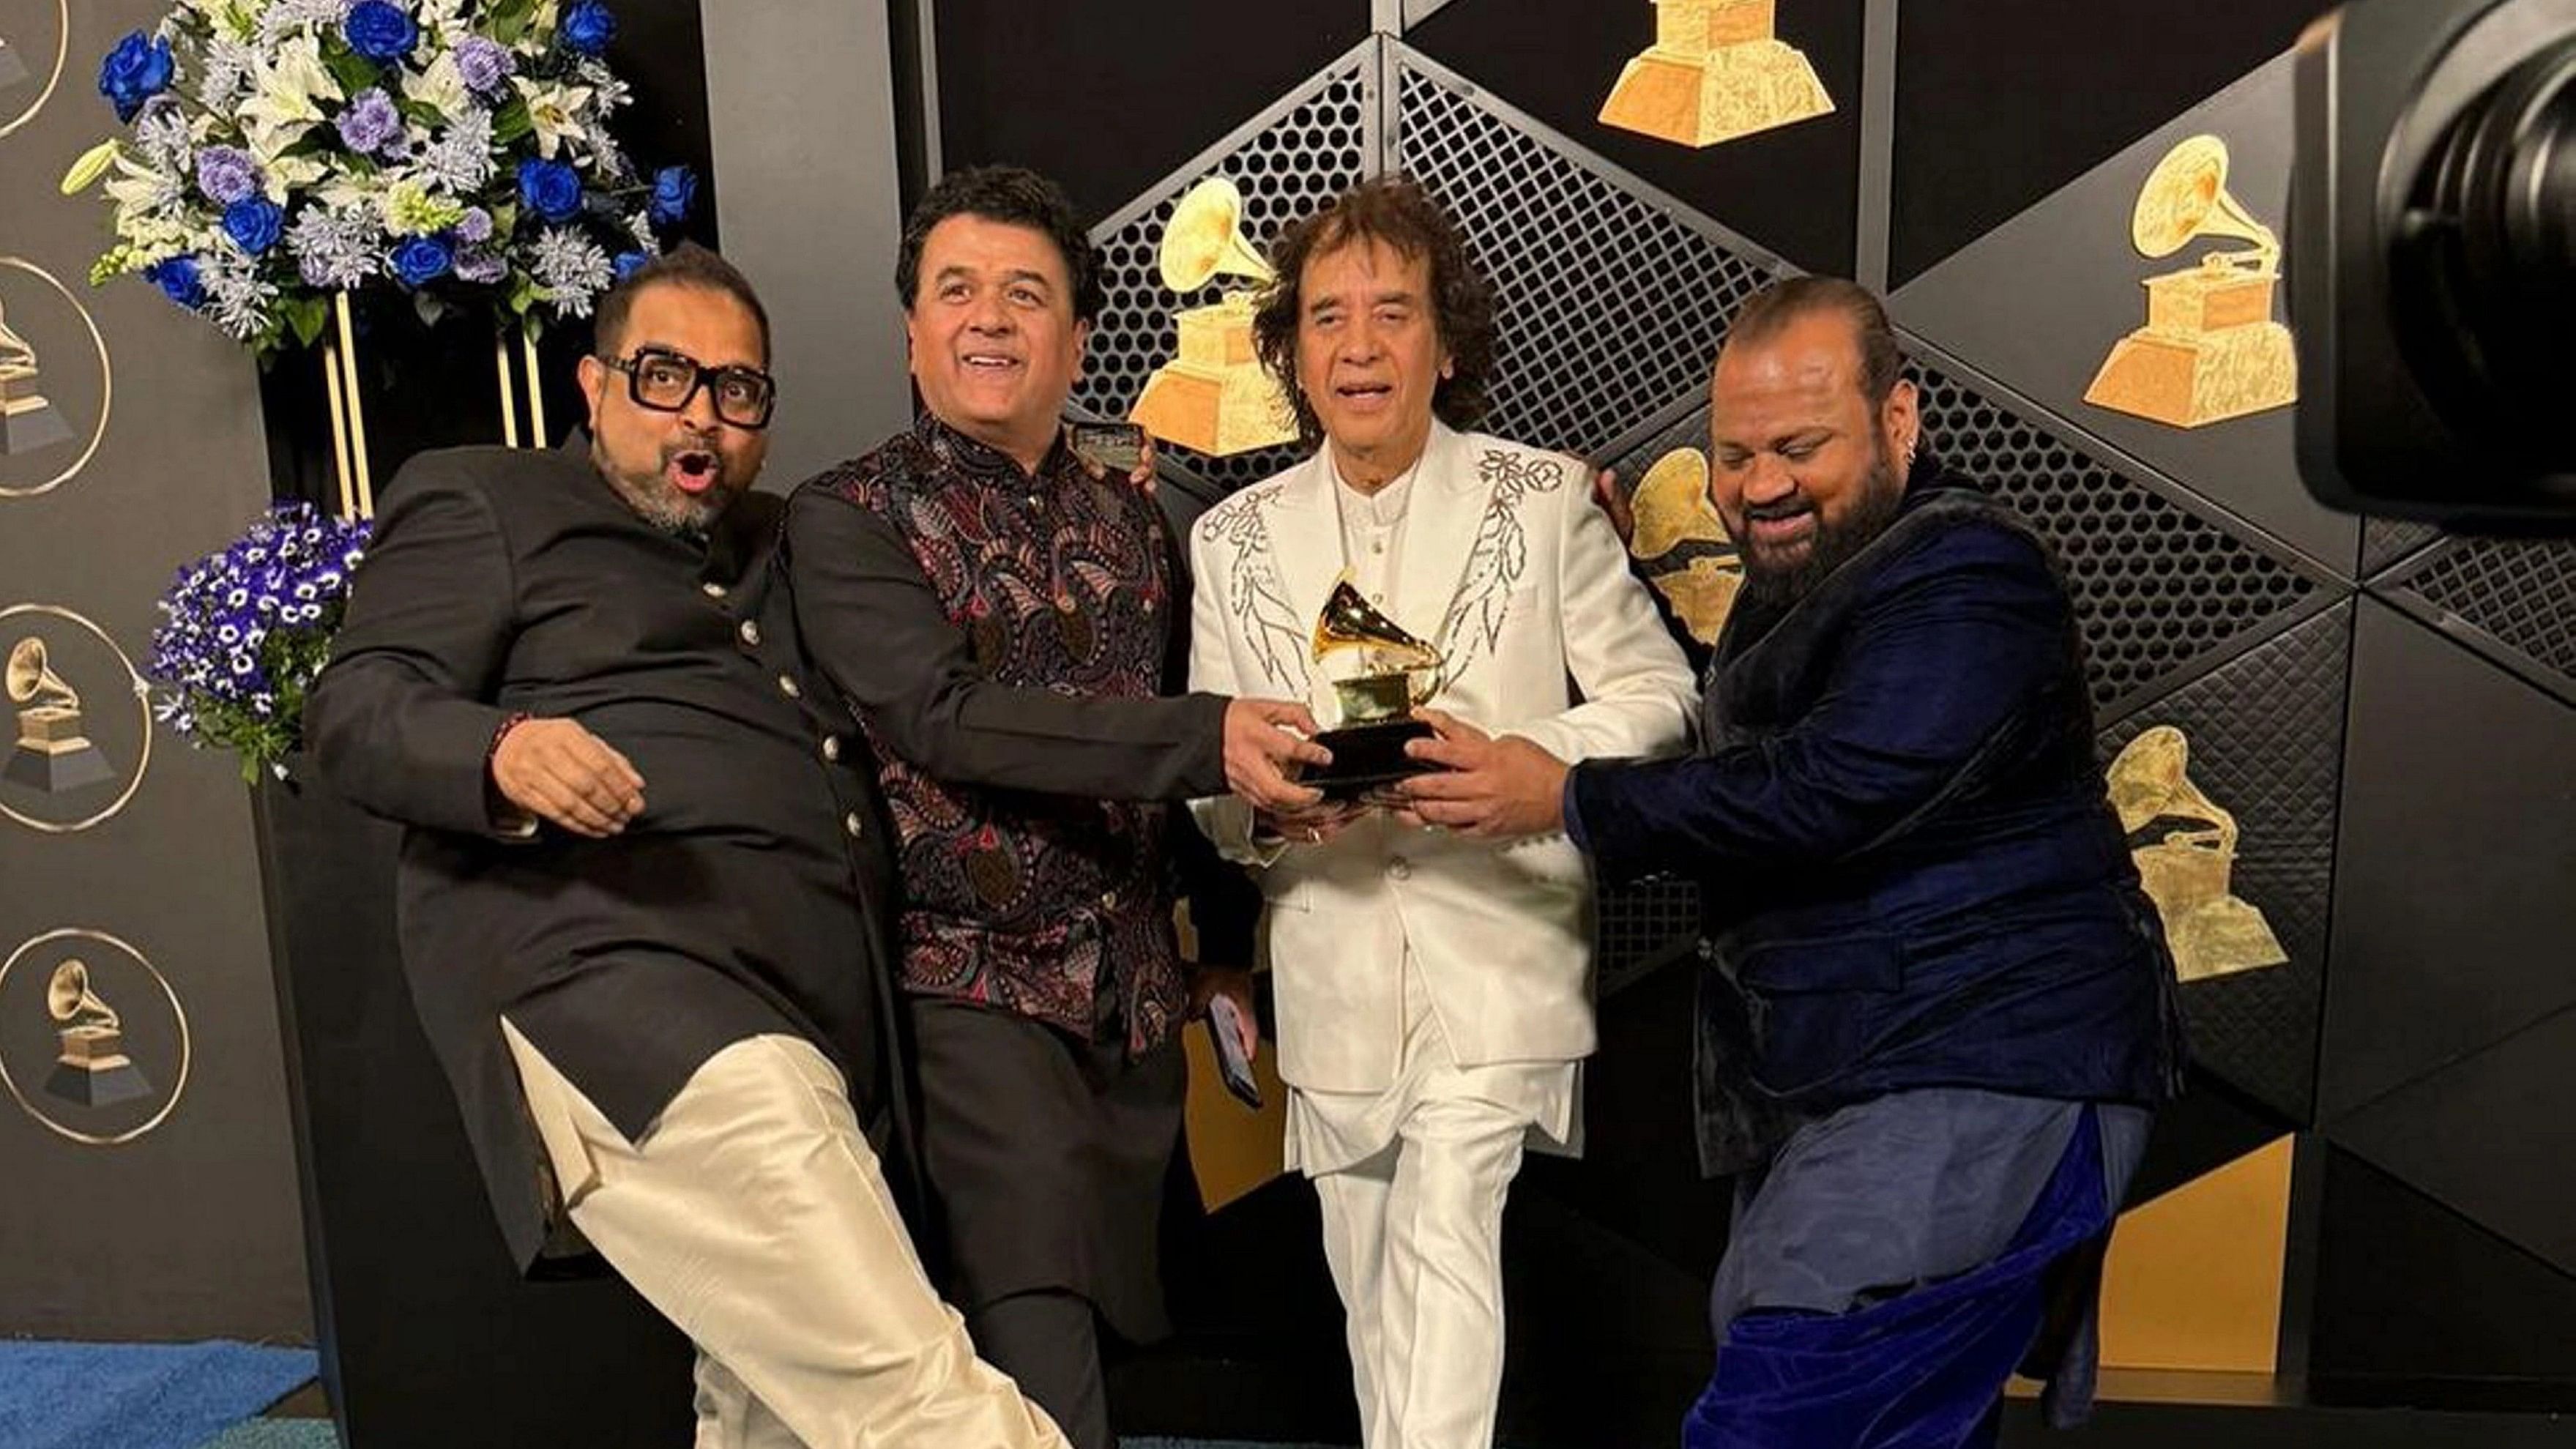 <div class="paragraphs"><p>A file photo of Ustad Zakir Hussain, vocalist Shankar Mahadevan, percussionist V Selvaganesh and violinist Ganesh Rajagopalan of Shakti posing for photos with the award for best global music album for 'This Moment' during the 66th annual Grammy Awards, in Los Angeles, USA.</p></div>